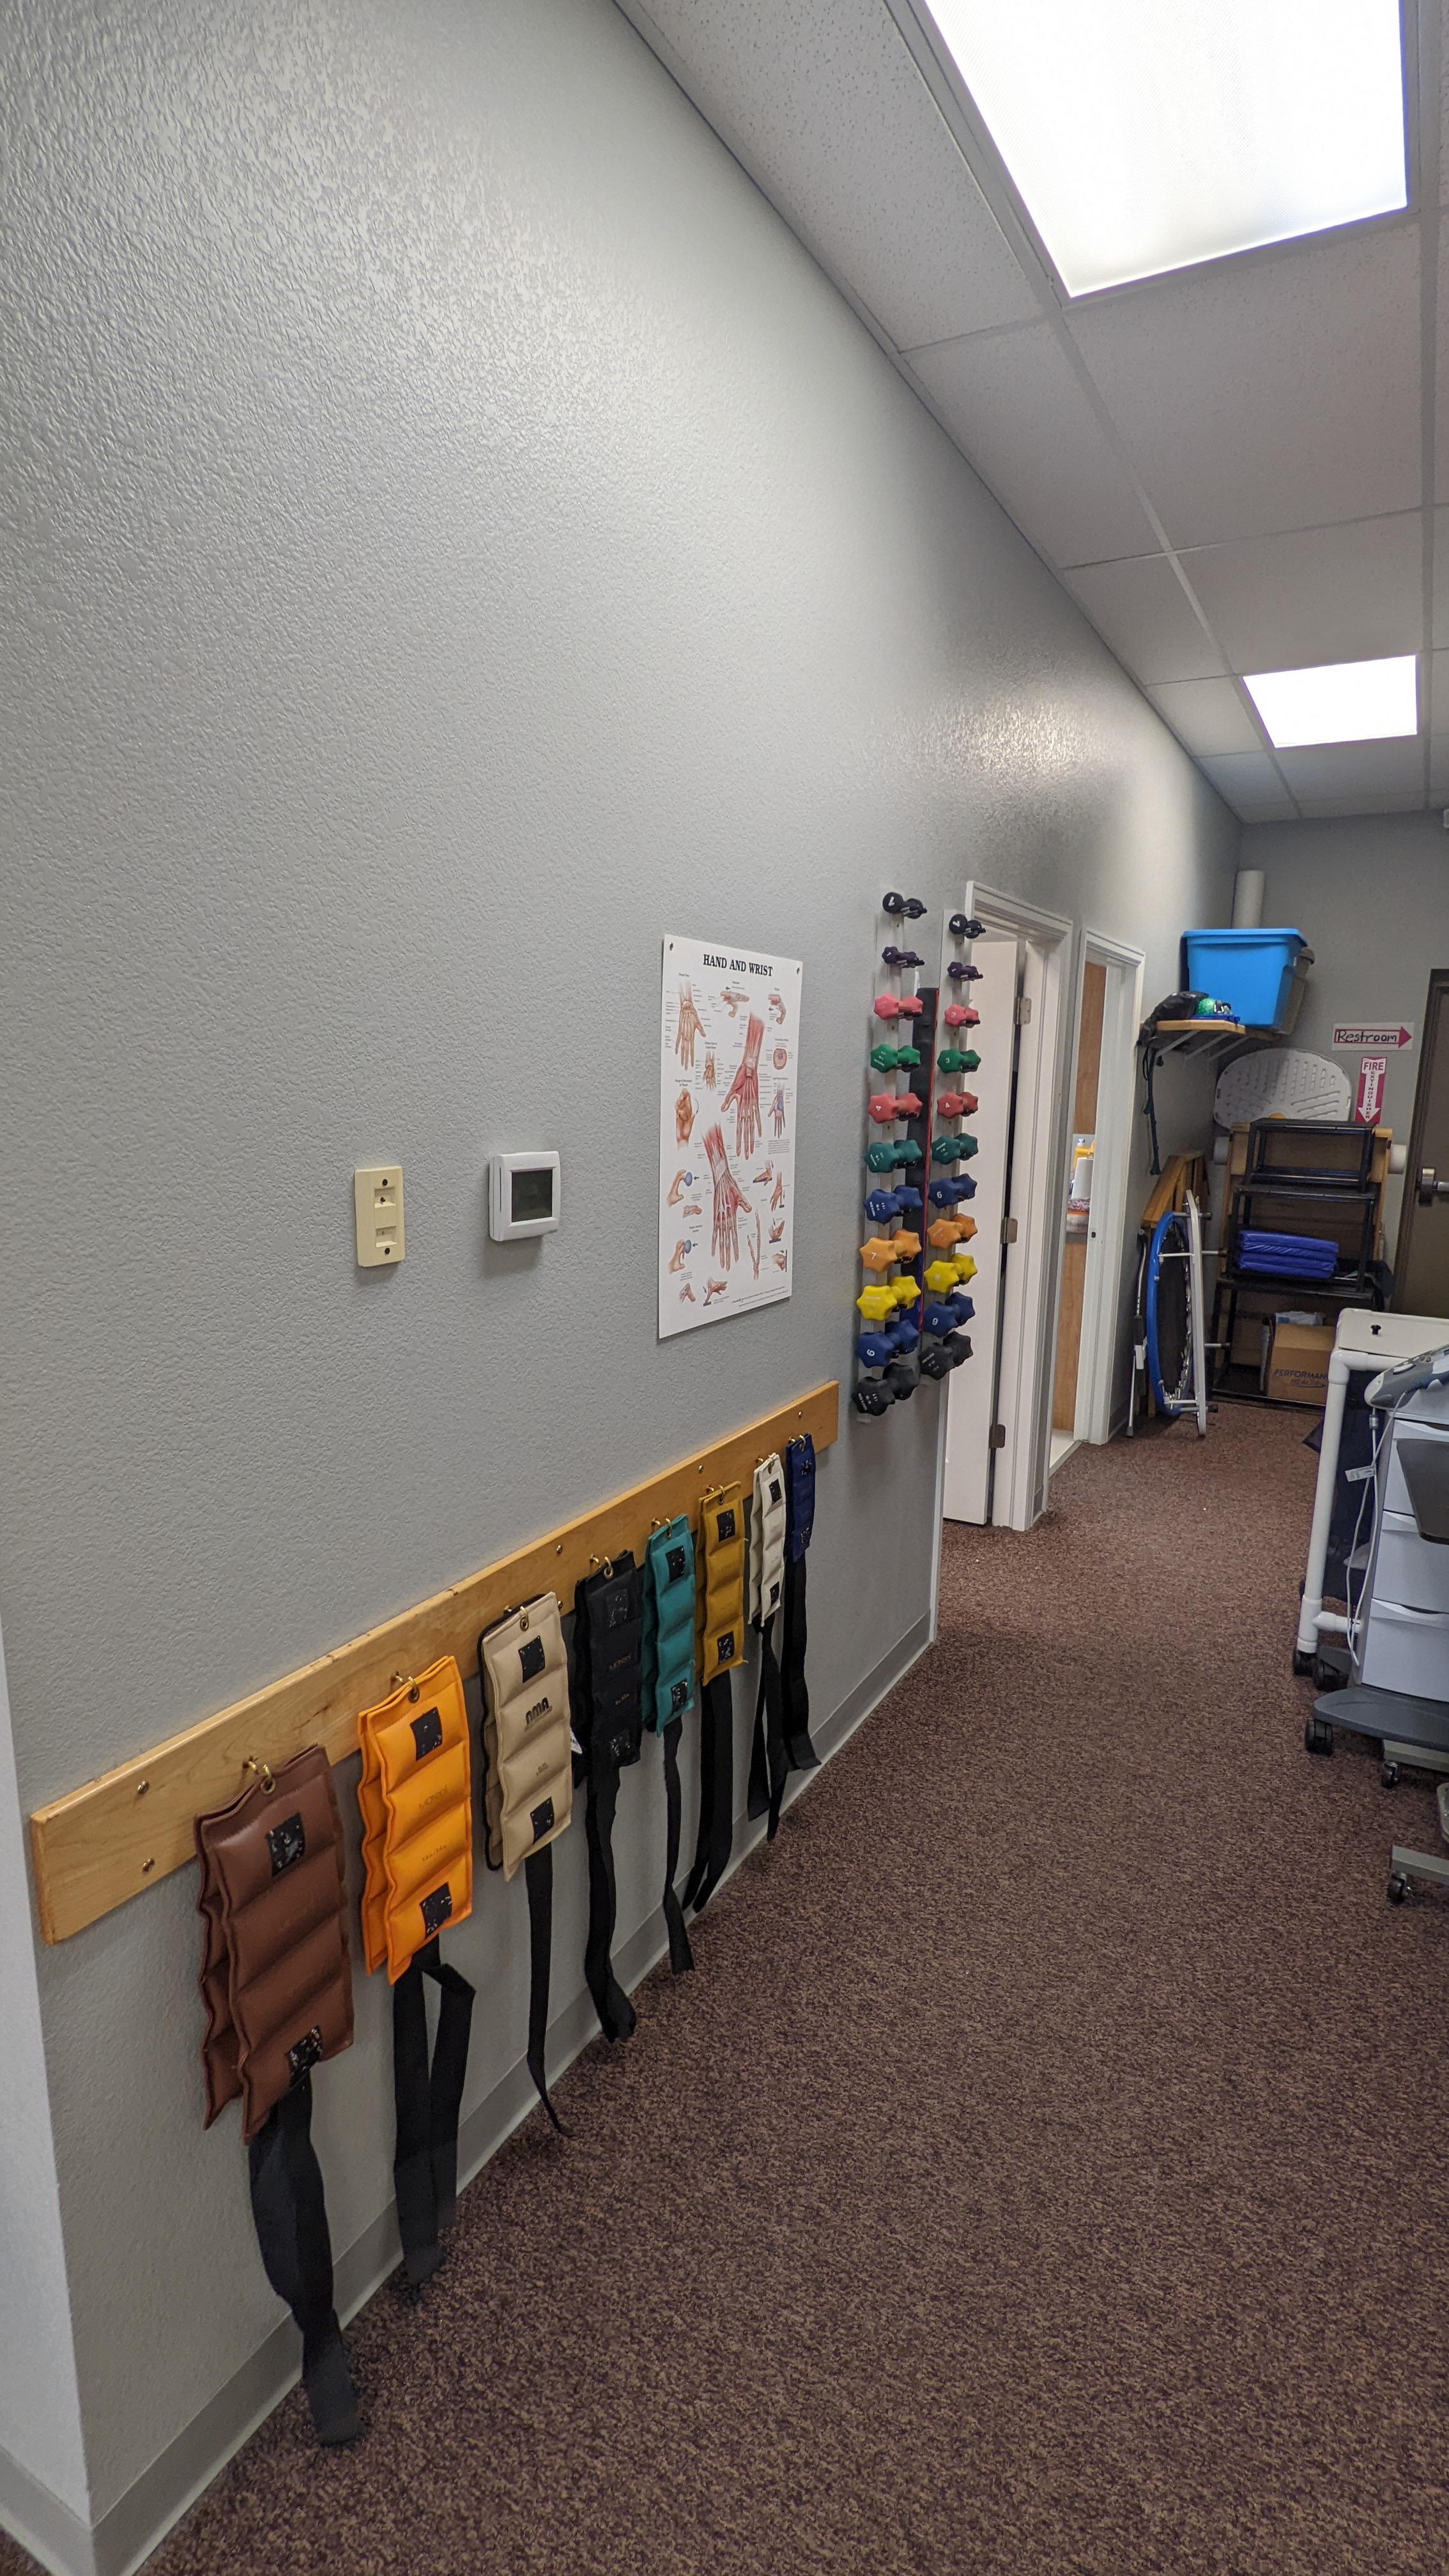 Pro Active Physical Therapy - Eaton
201 S Elm Ave
Ste. 203
Eaton, CO 80615